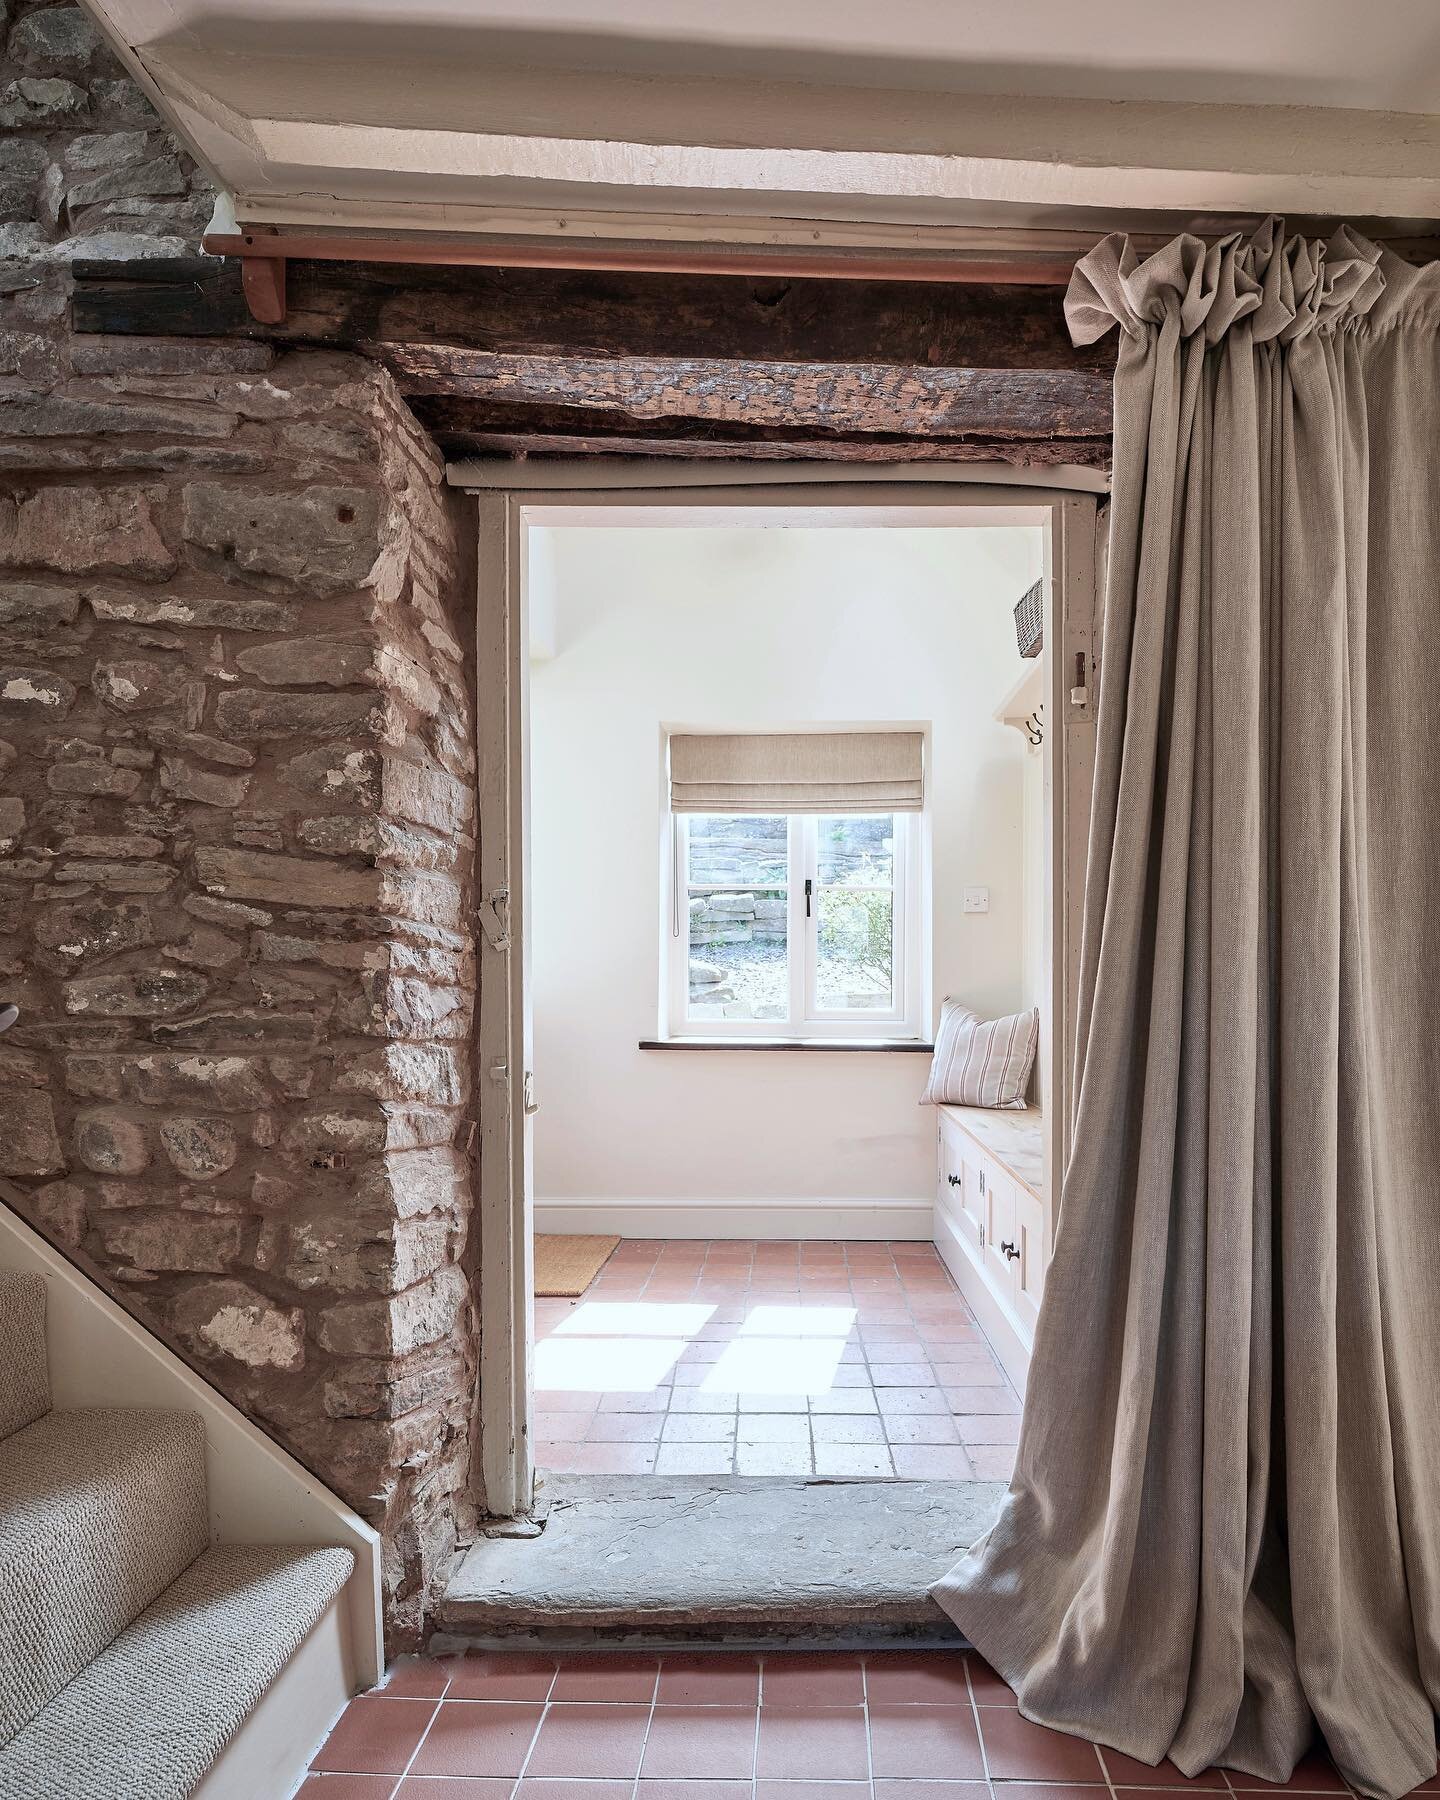 A layer of warmth with our signature cottage pleat curtain. We used a beautiful linen herringbone fabric full of texture and character in this sweet stone cottage 🤍 

#doorcurtain #cottagepleatcurtains #madetomeasure #linenfabric #cottageinterior #m